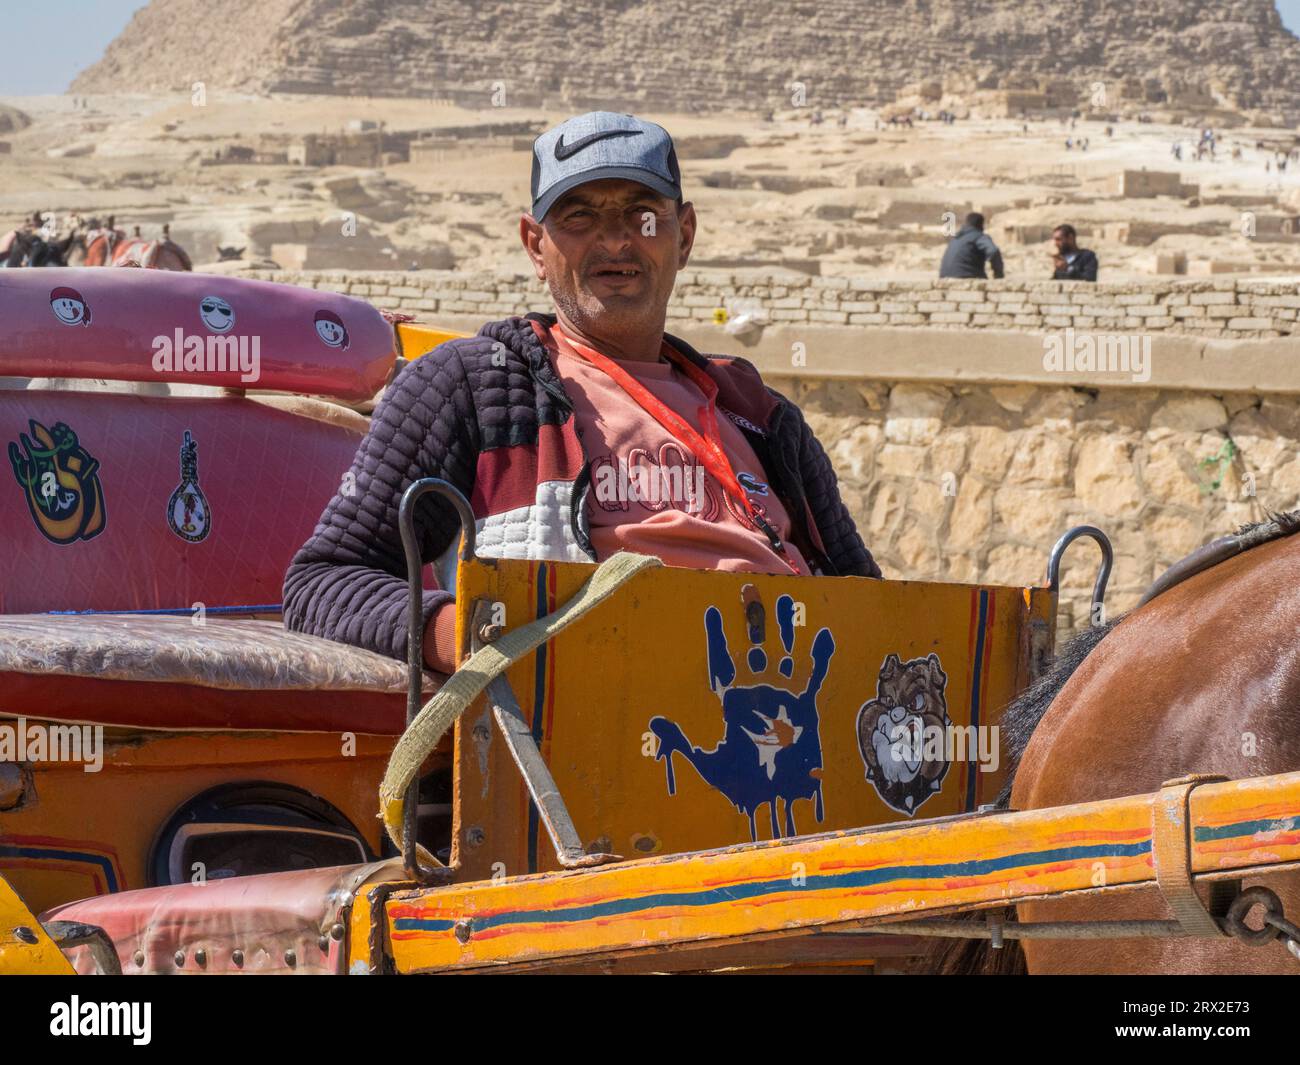 The driver of a decorated horse drawn carriage at the Pyramid complex, UNESCO World Heritage Site, Giza, near Cairo, Egypt, North Africa, Africa Stock Photo